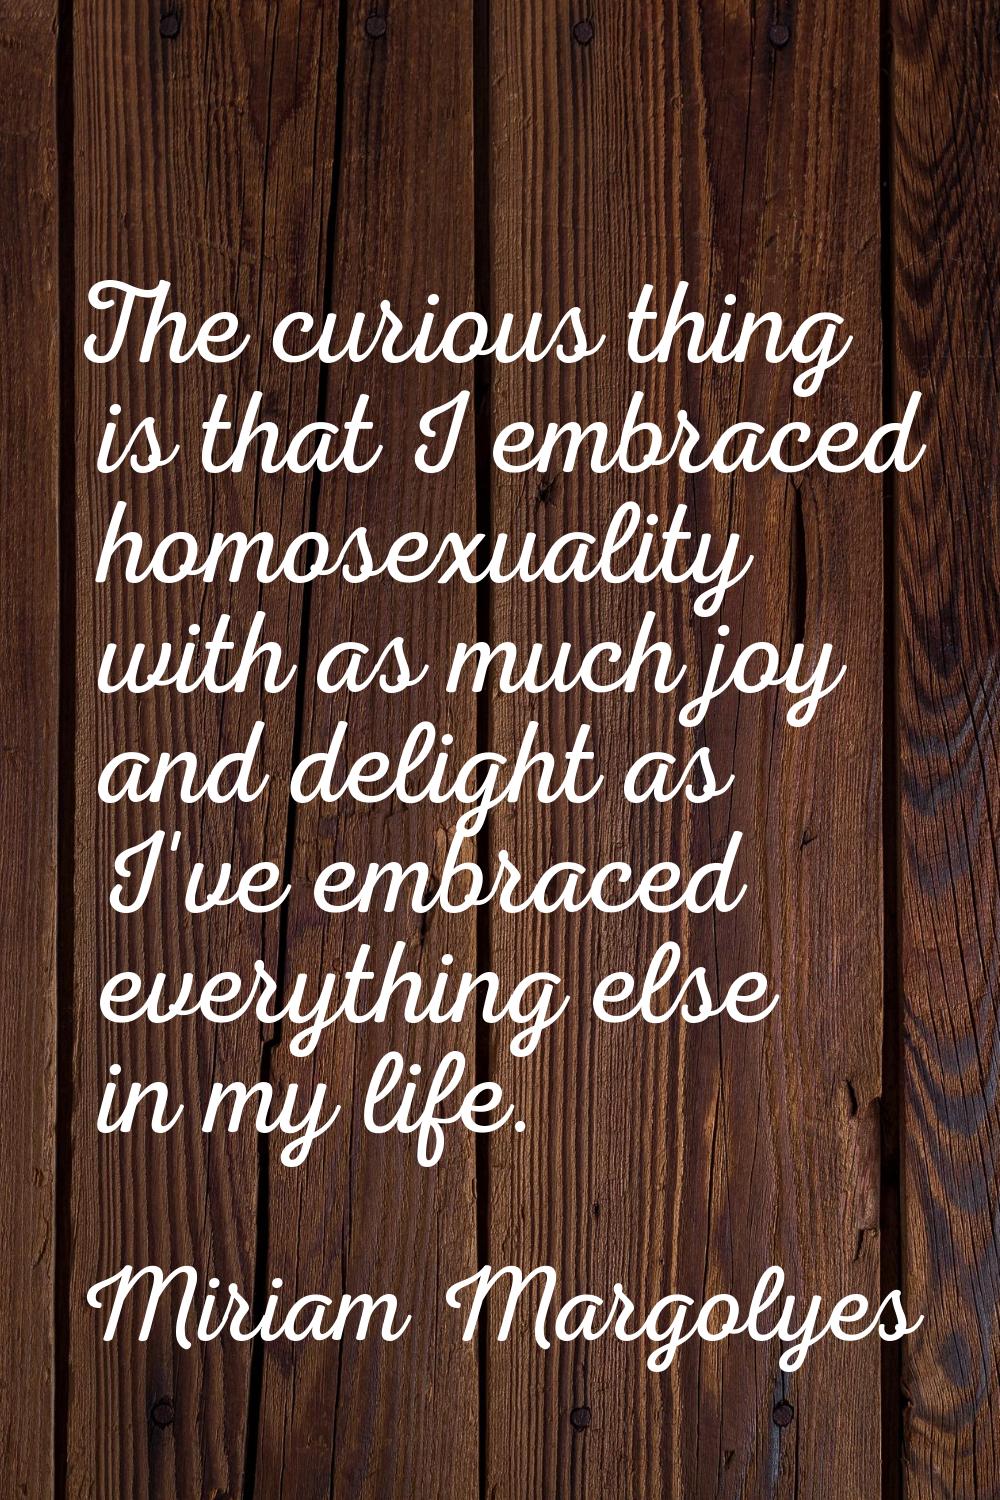 The curious thing is that I embraced homosexuality with as much joy and delight as I've embraced ev